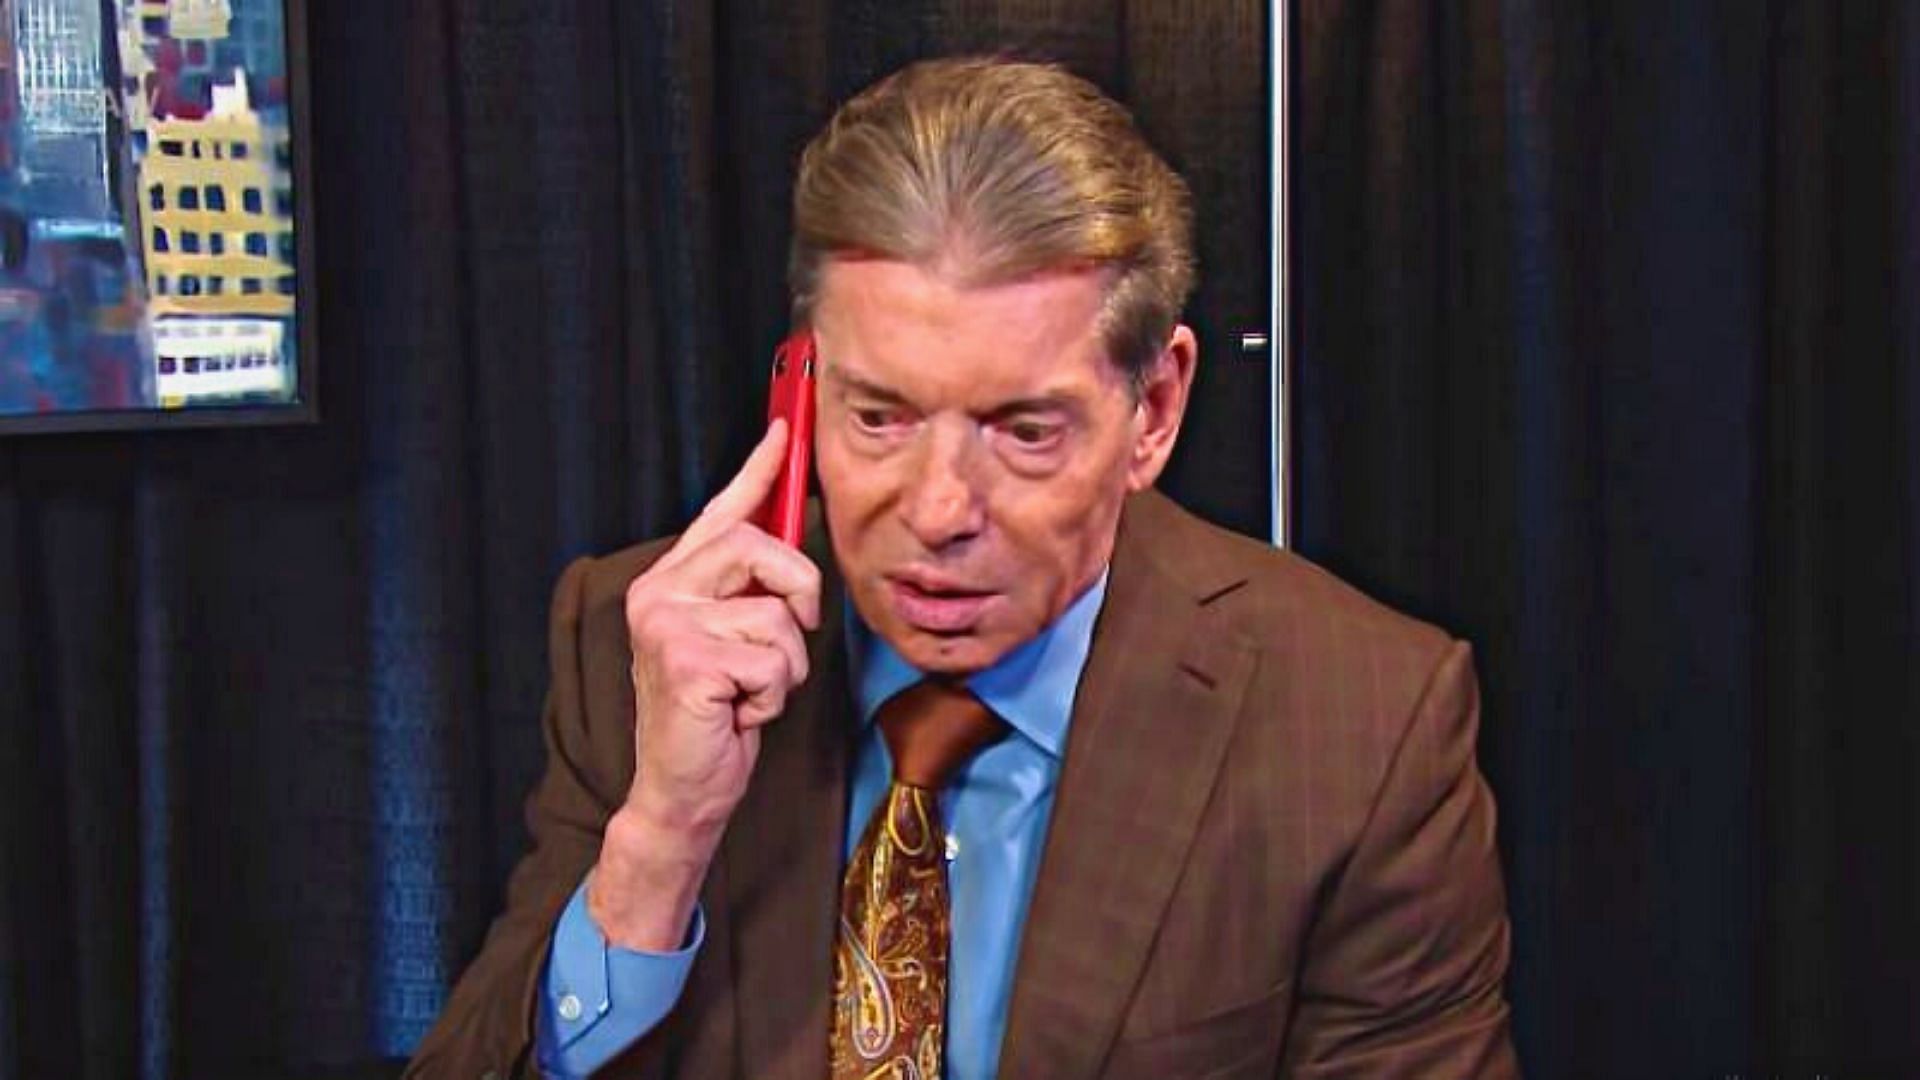 Mark Henry shared details of a phone call with Vince McMahon